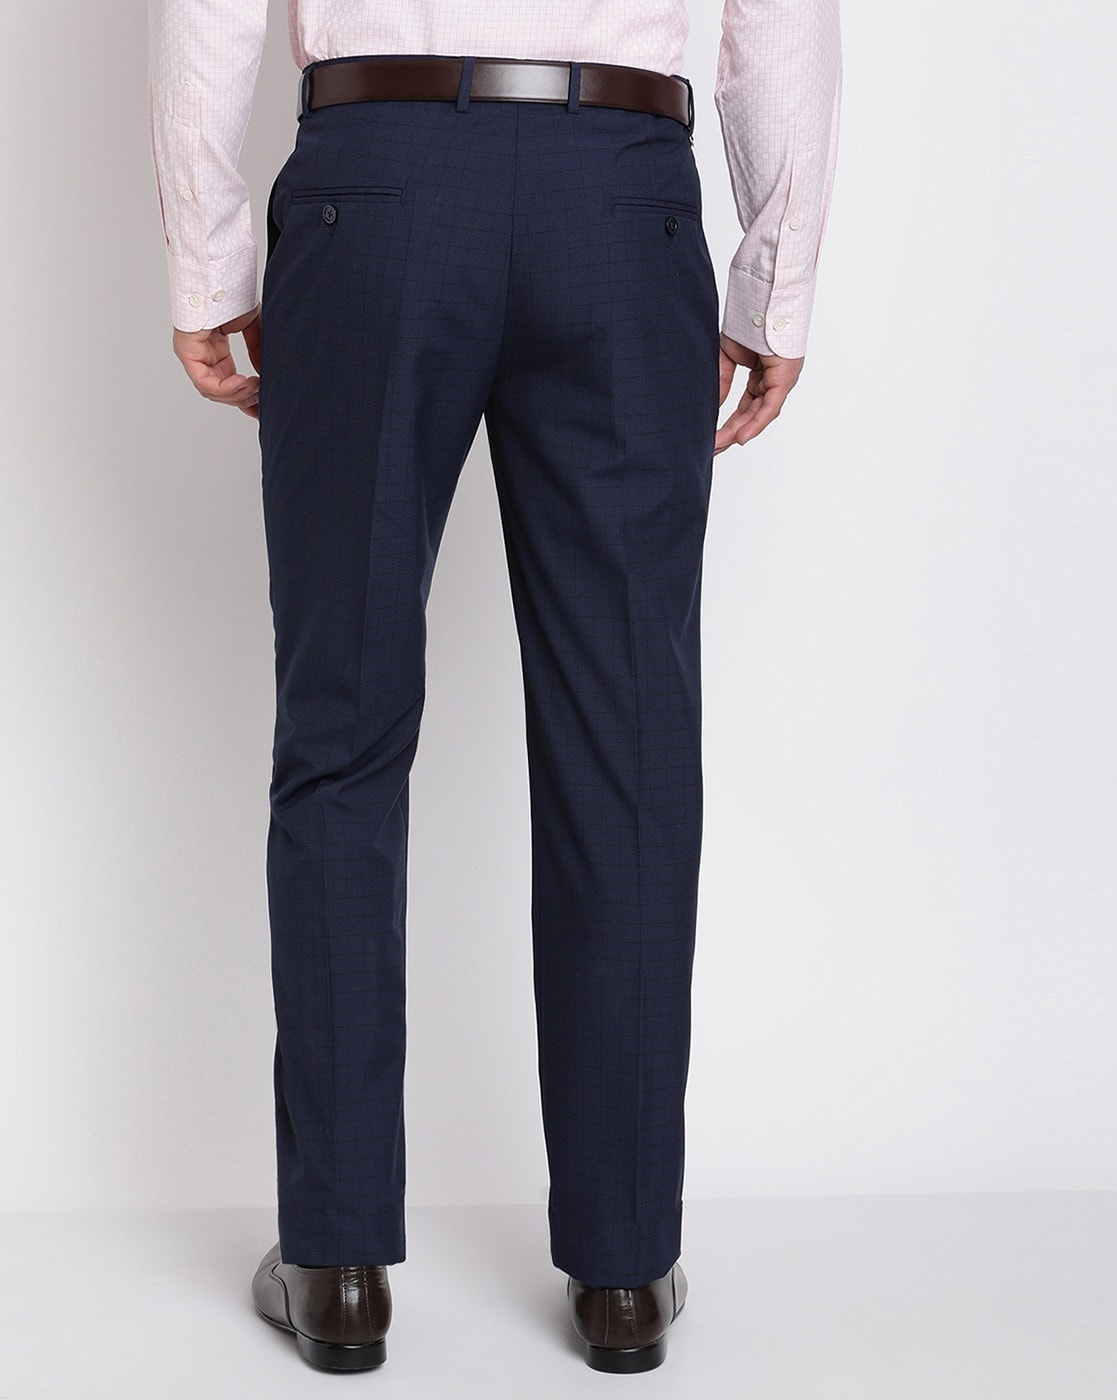 Crozo By Cantabil Trousers - Buy Crozo By Cantabil Trousers online in India